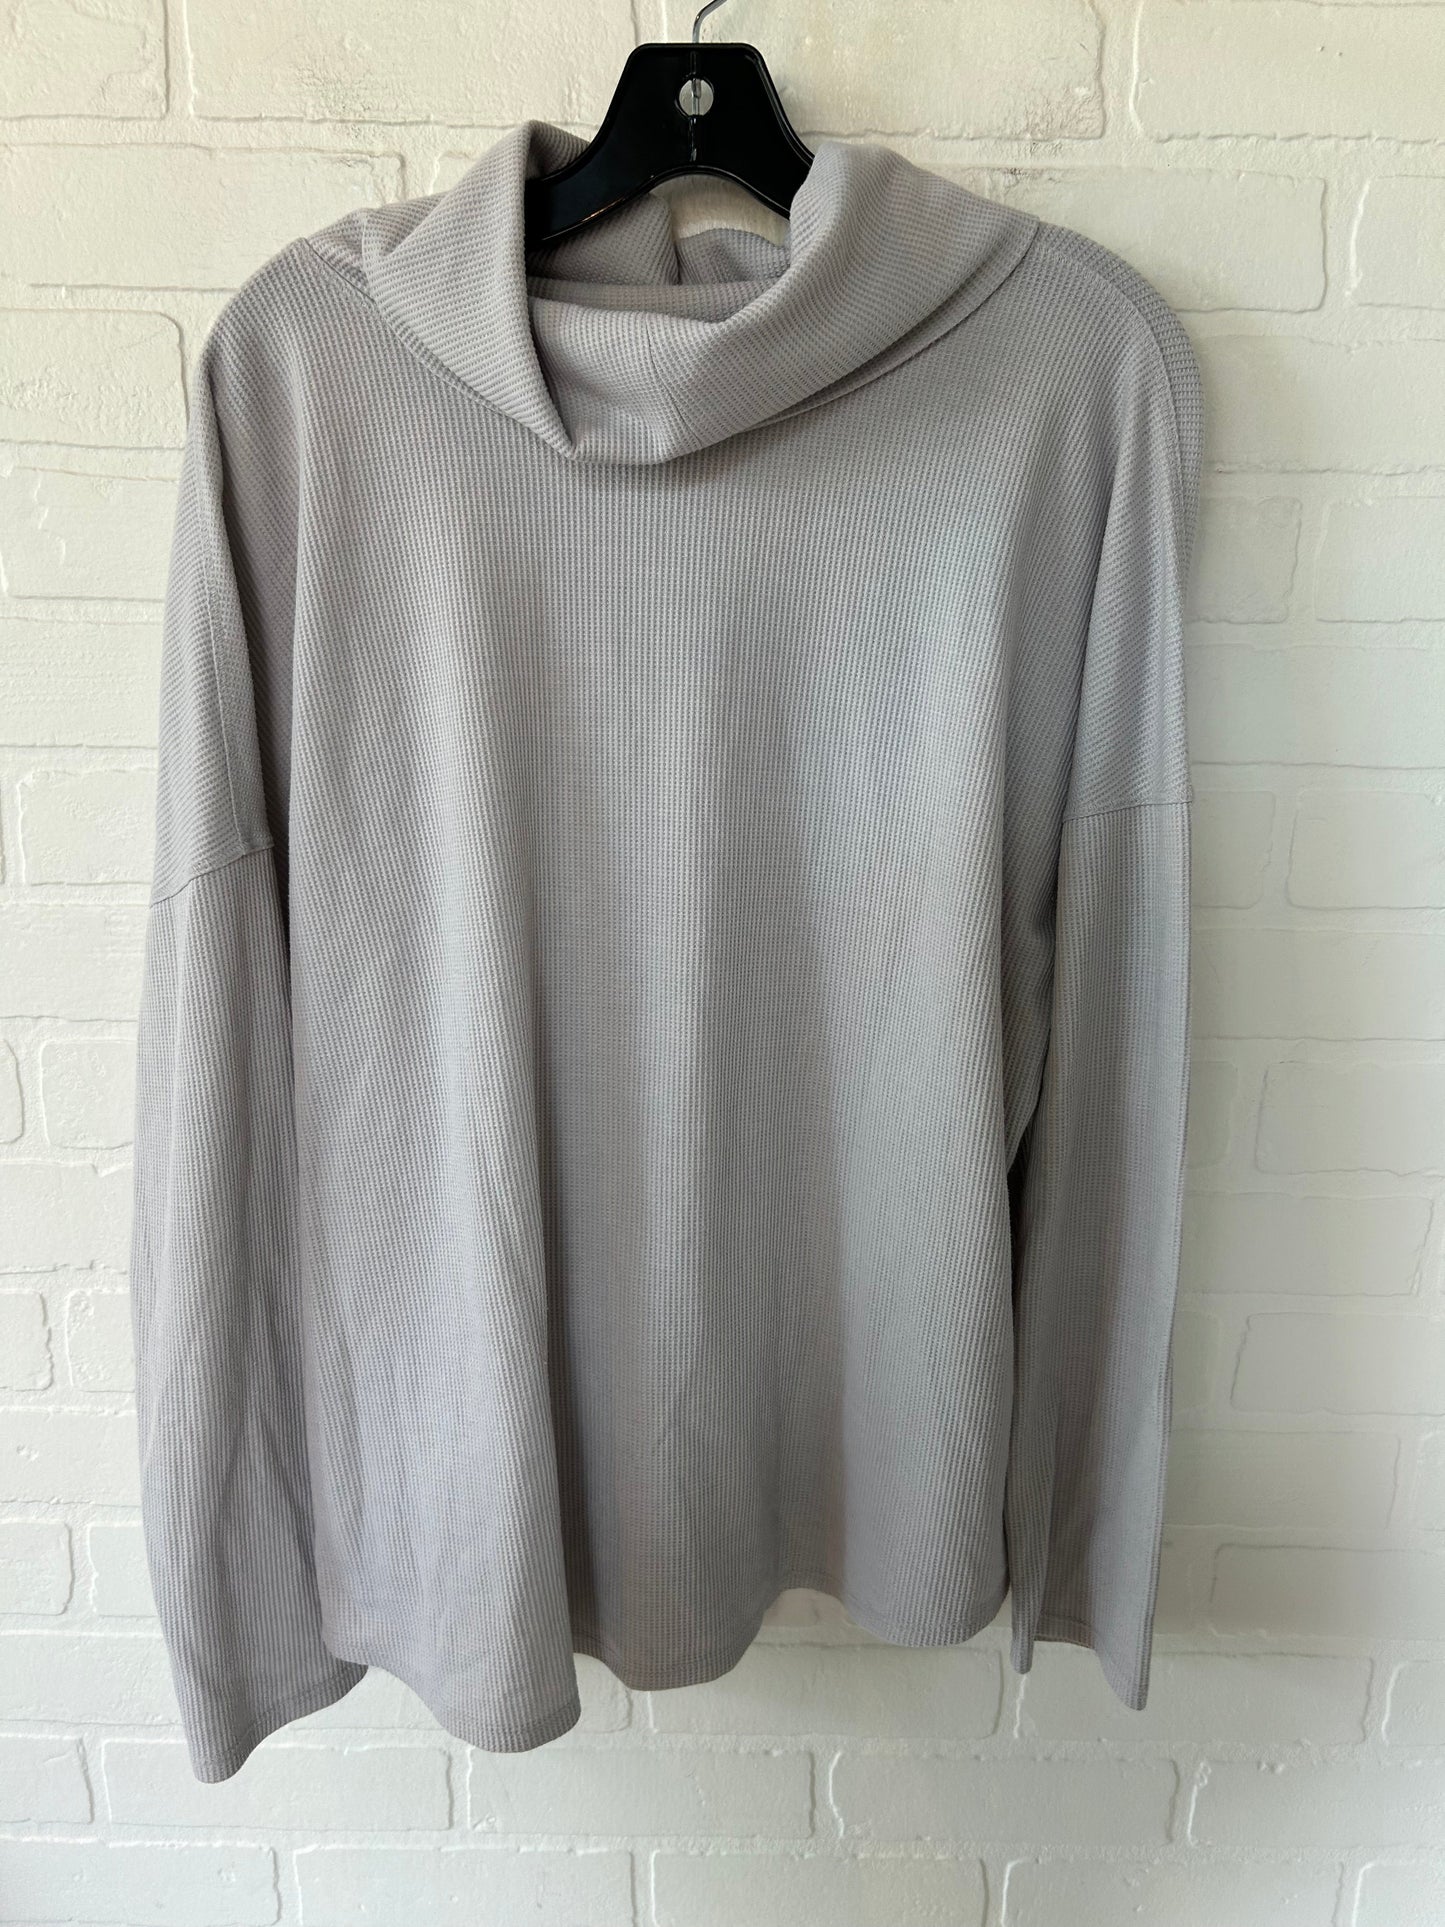 Grey Top Long Sleeve A New Day, Size Xl